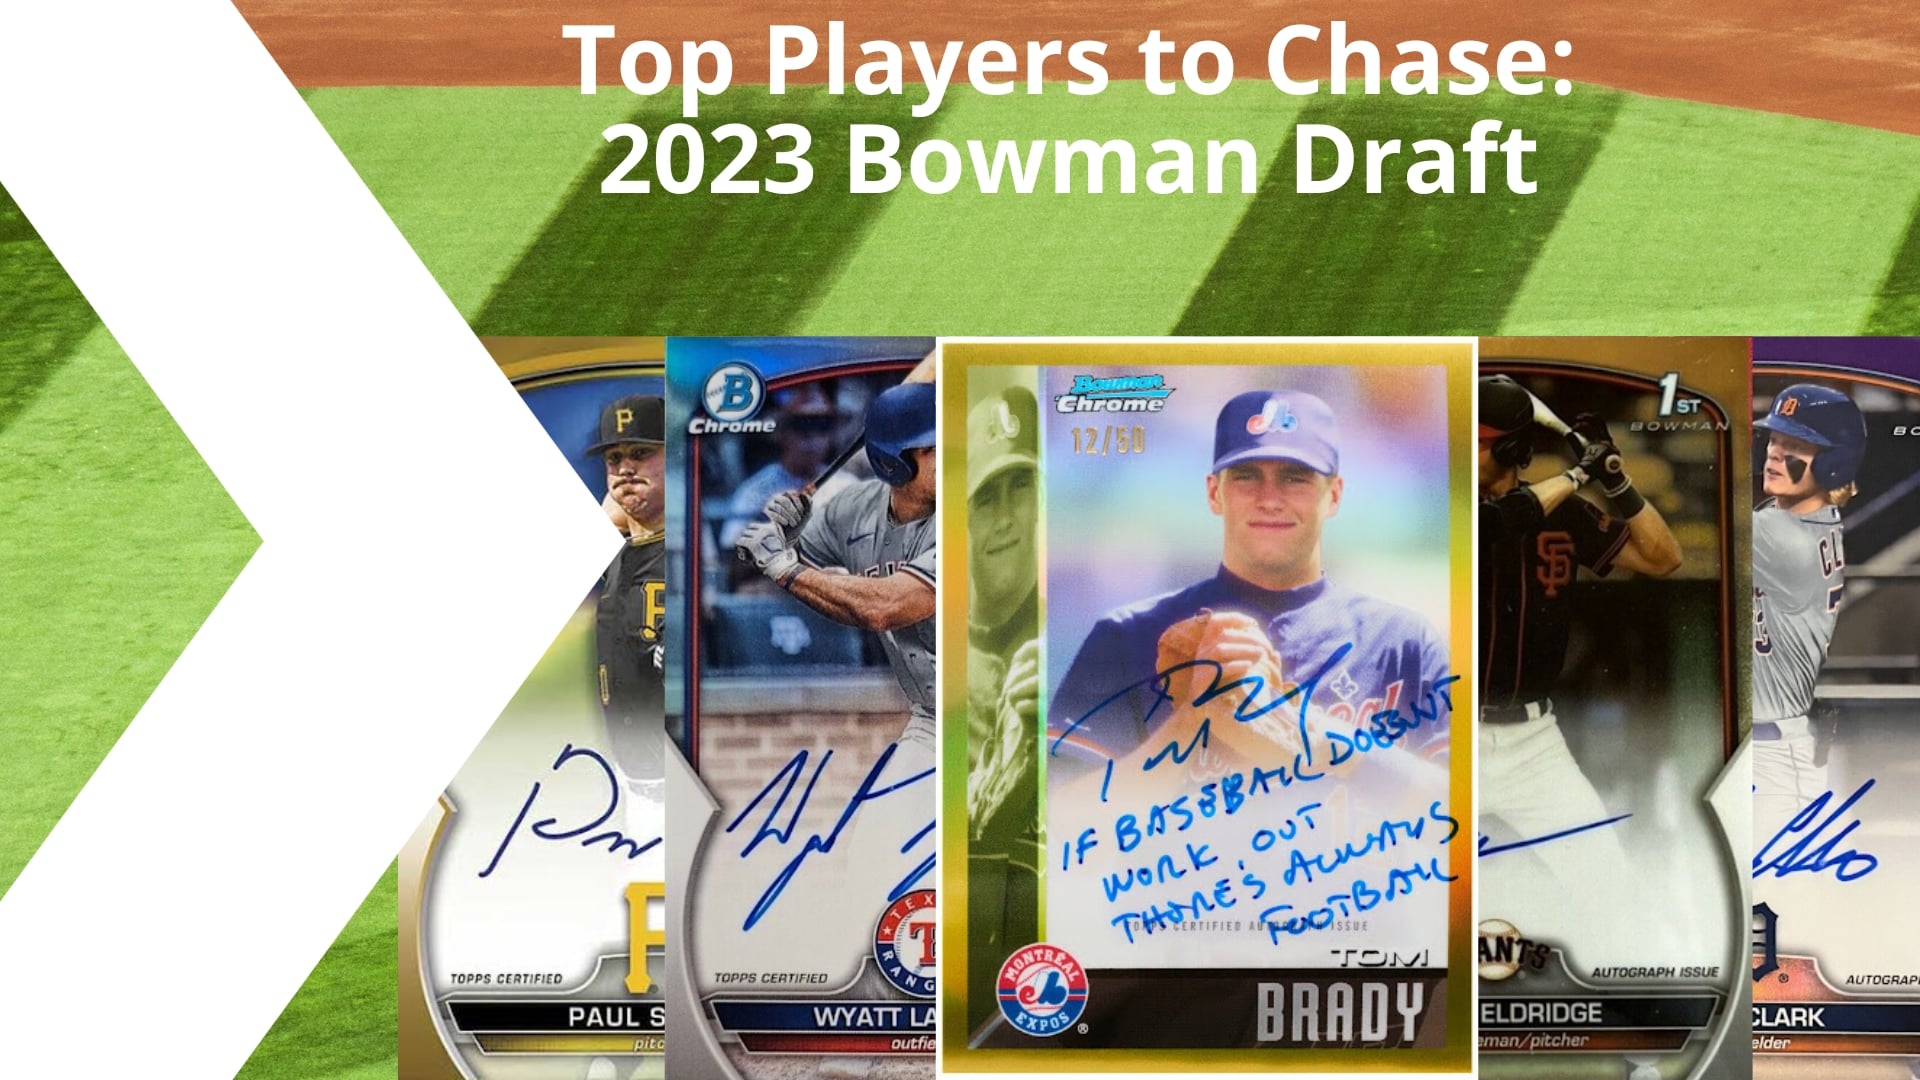 Top Players to Chase in 2023 Bowman Draft